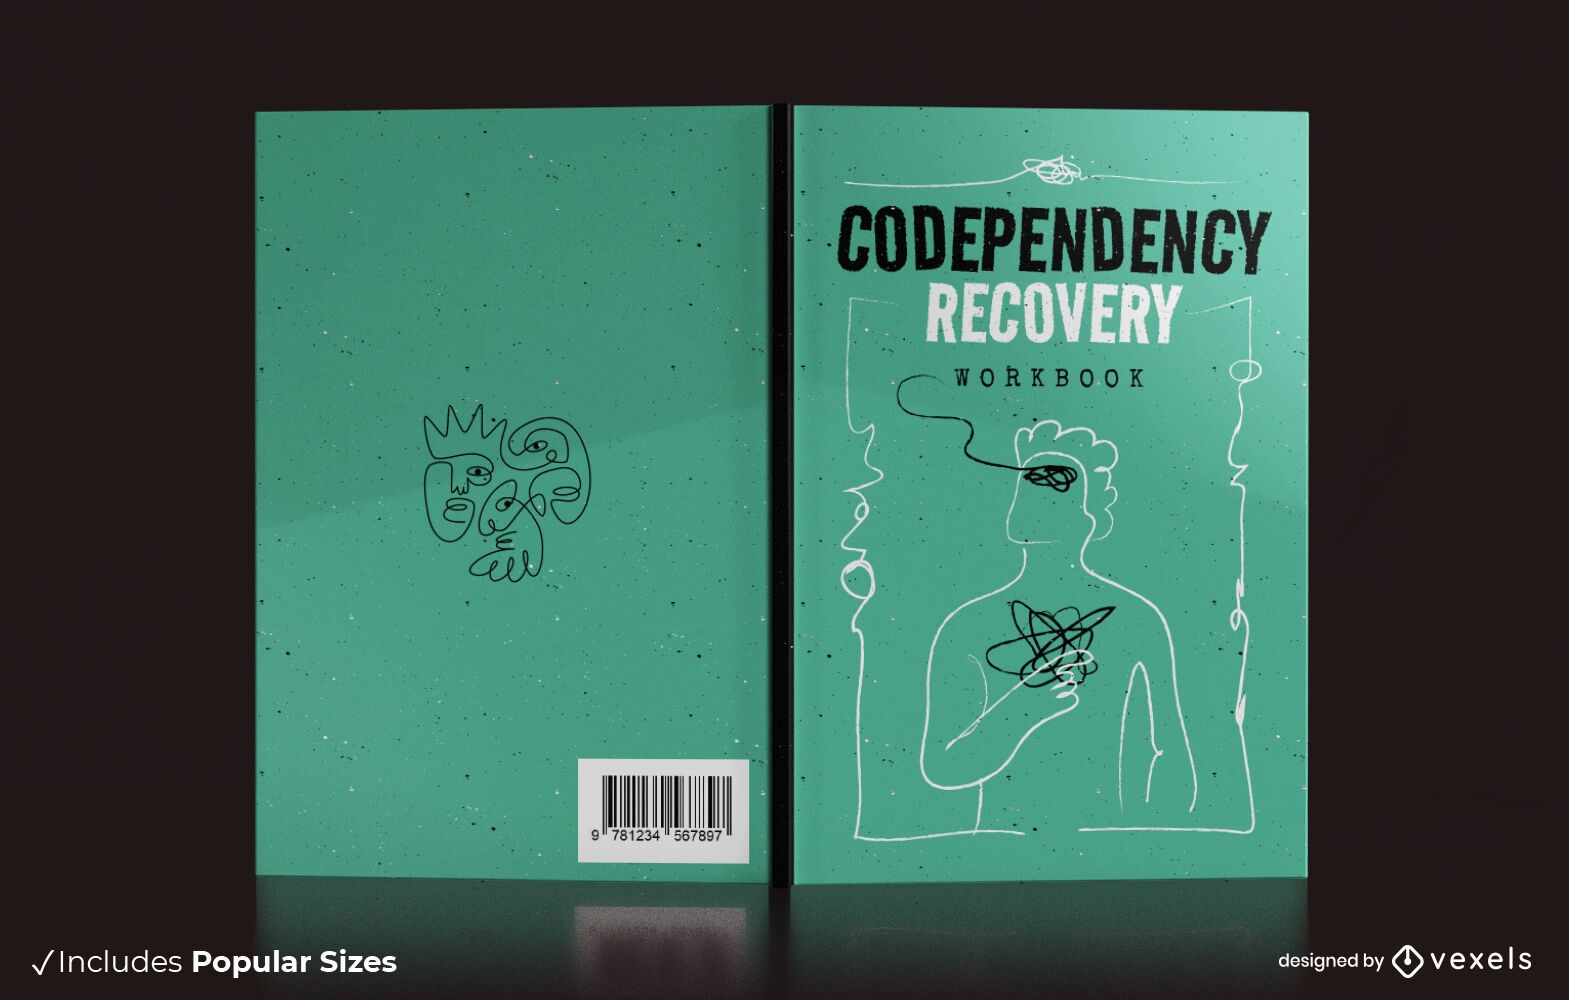 Design des Codependency-Recovery-Buchumschlags KDP